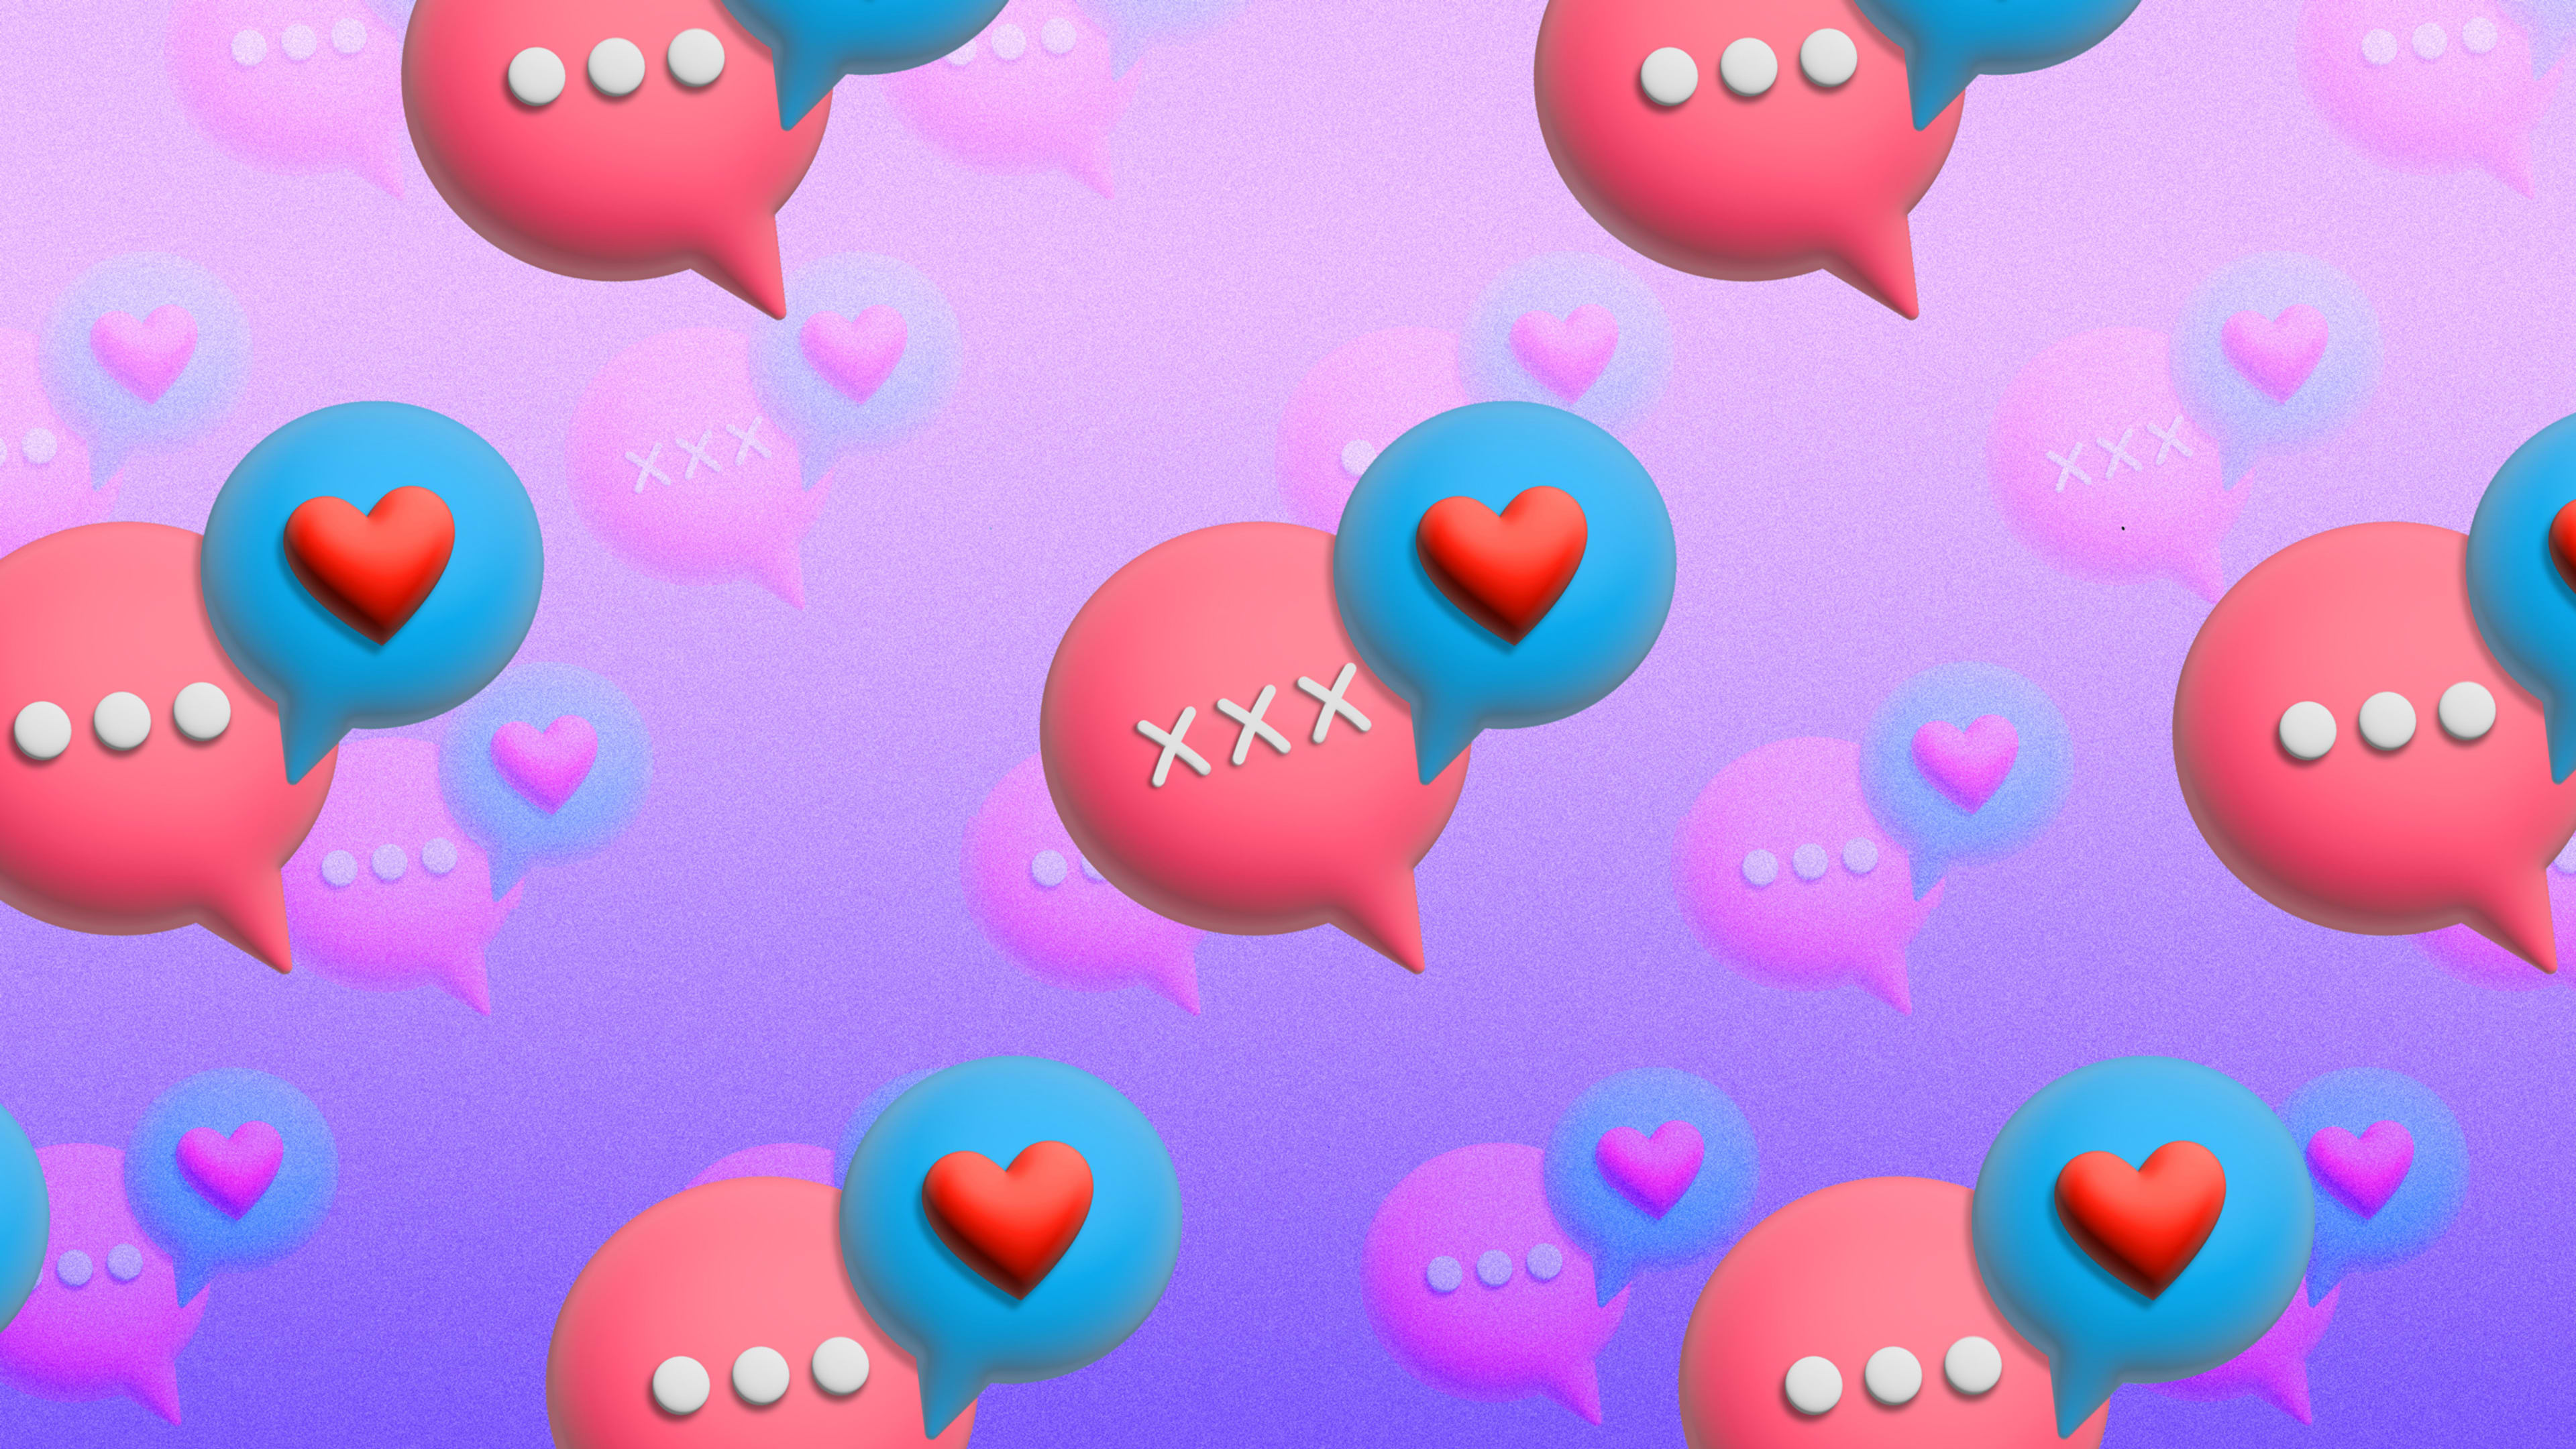 Nomi’s chatbots want to be your friends, mentors . . . and lovers